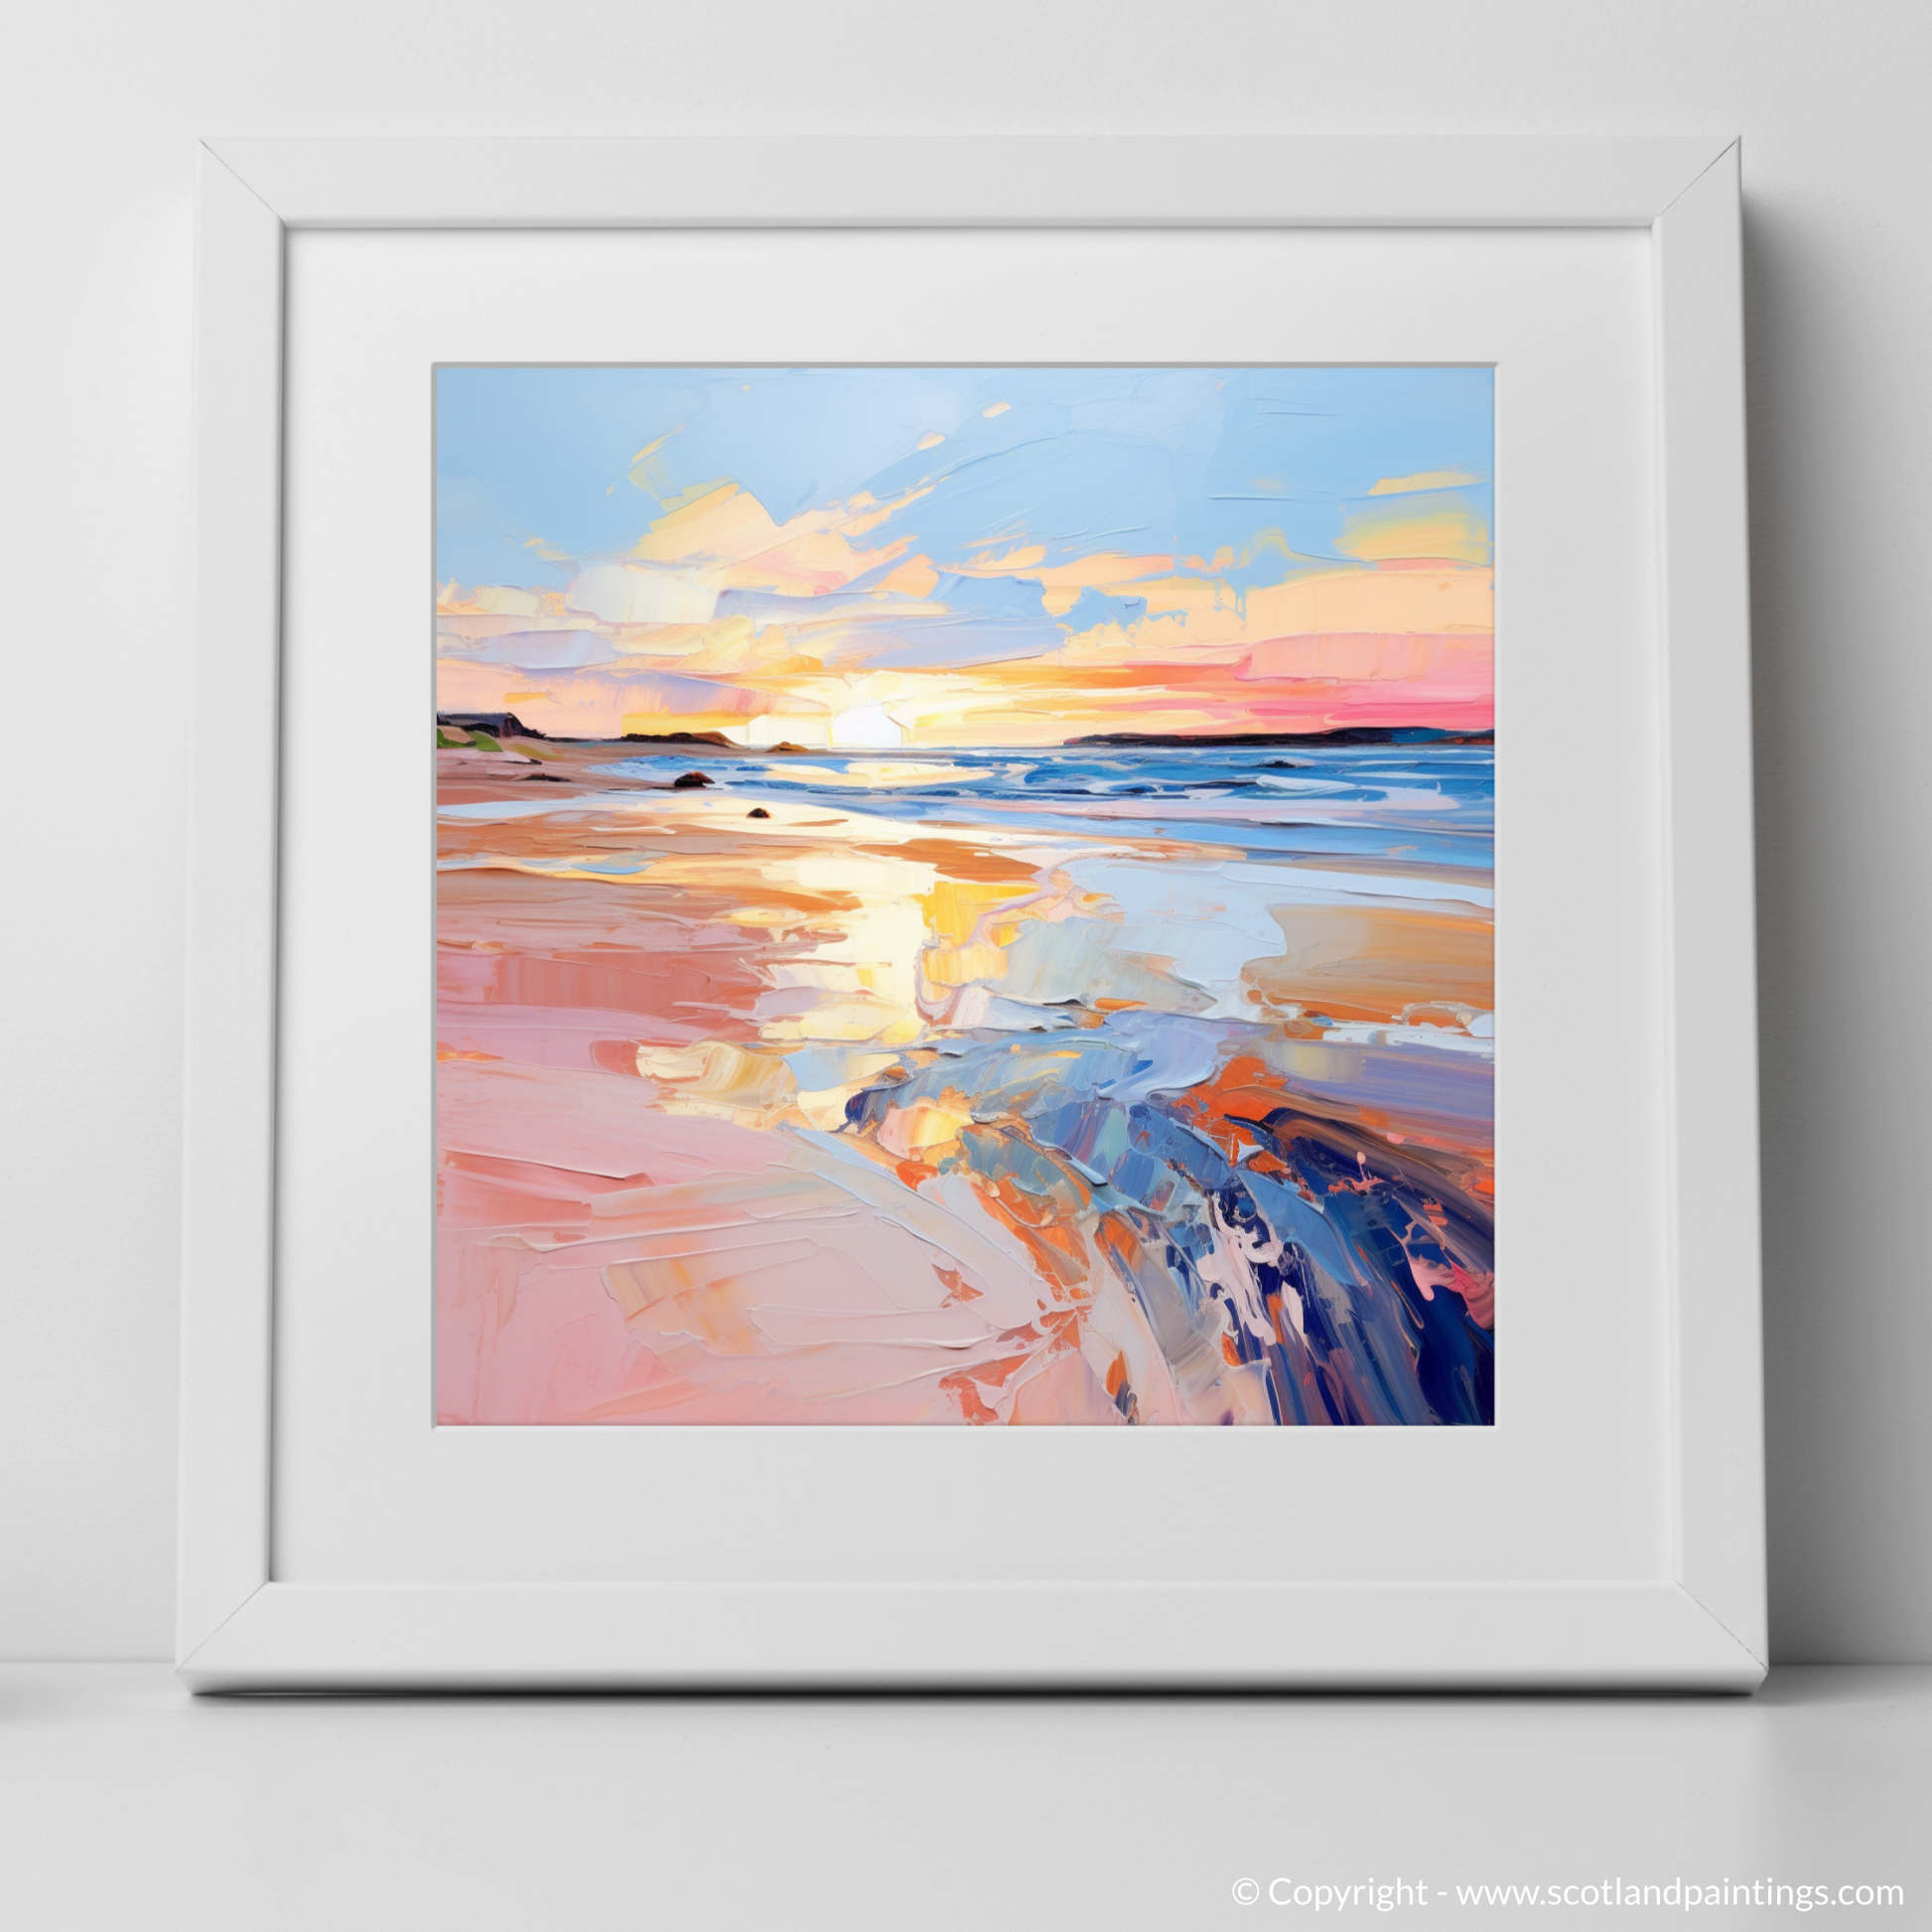 Art Print of Gullane Beach at sunset with a white frame